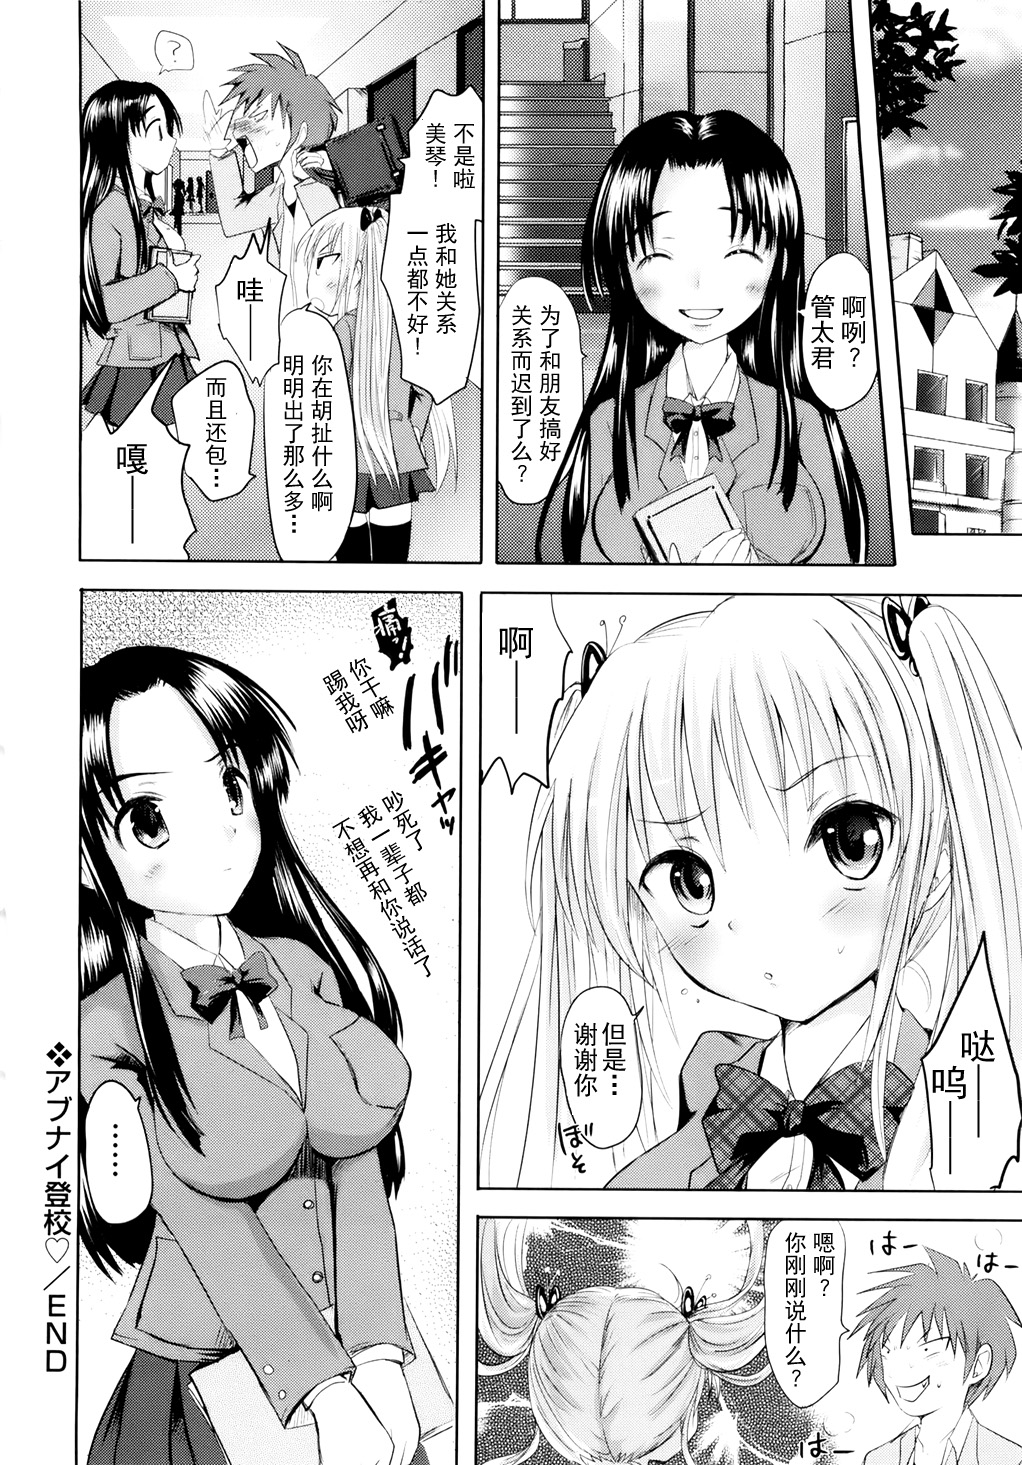 [Natsume Fumika] Sundere! Ch. 2 [Chinese] [夏目文花] スンデレ! 章2 [中文翻譯]